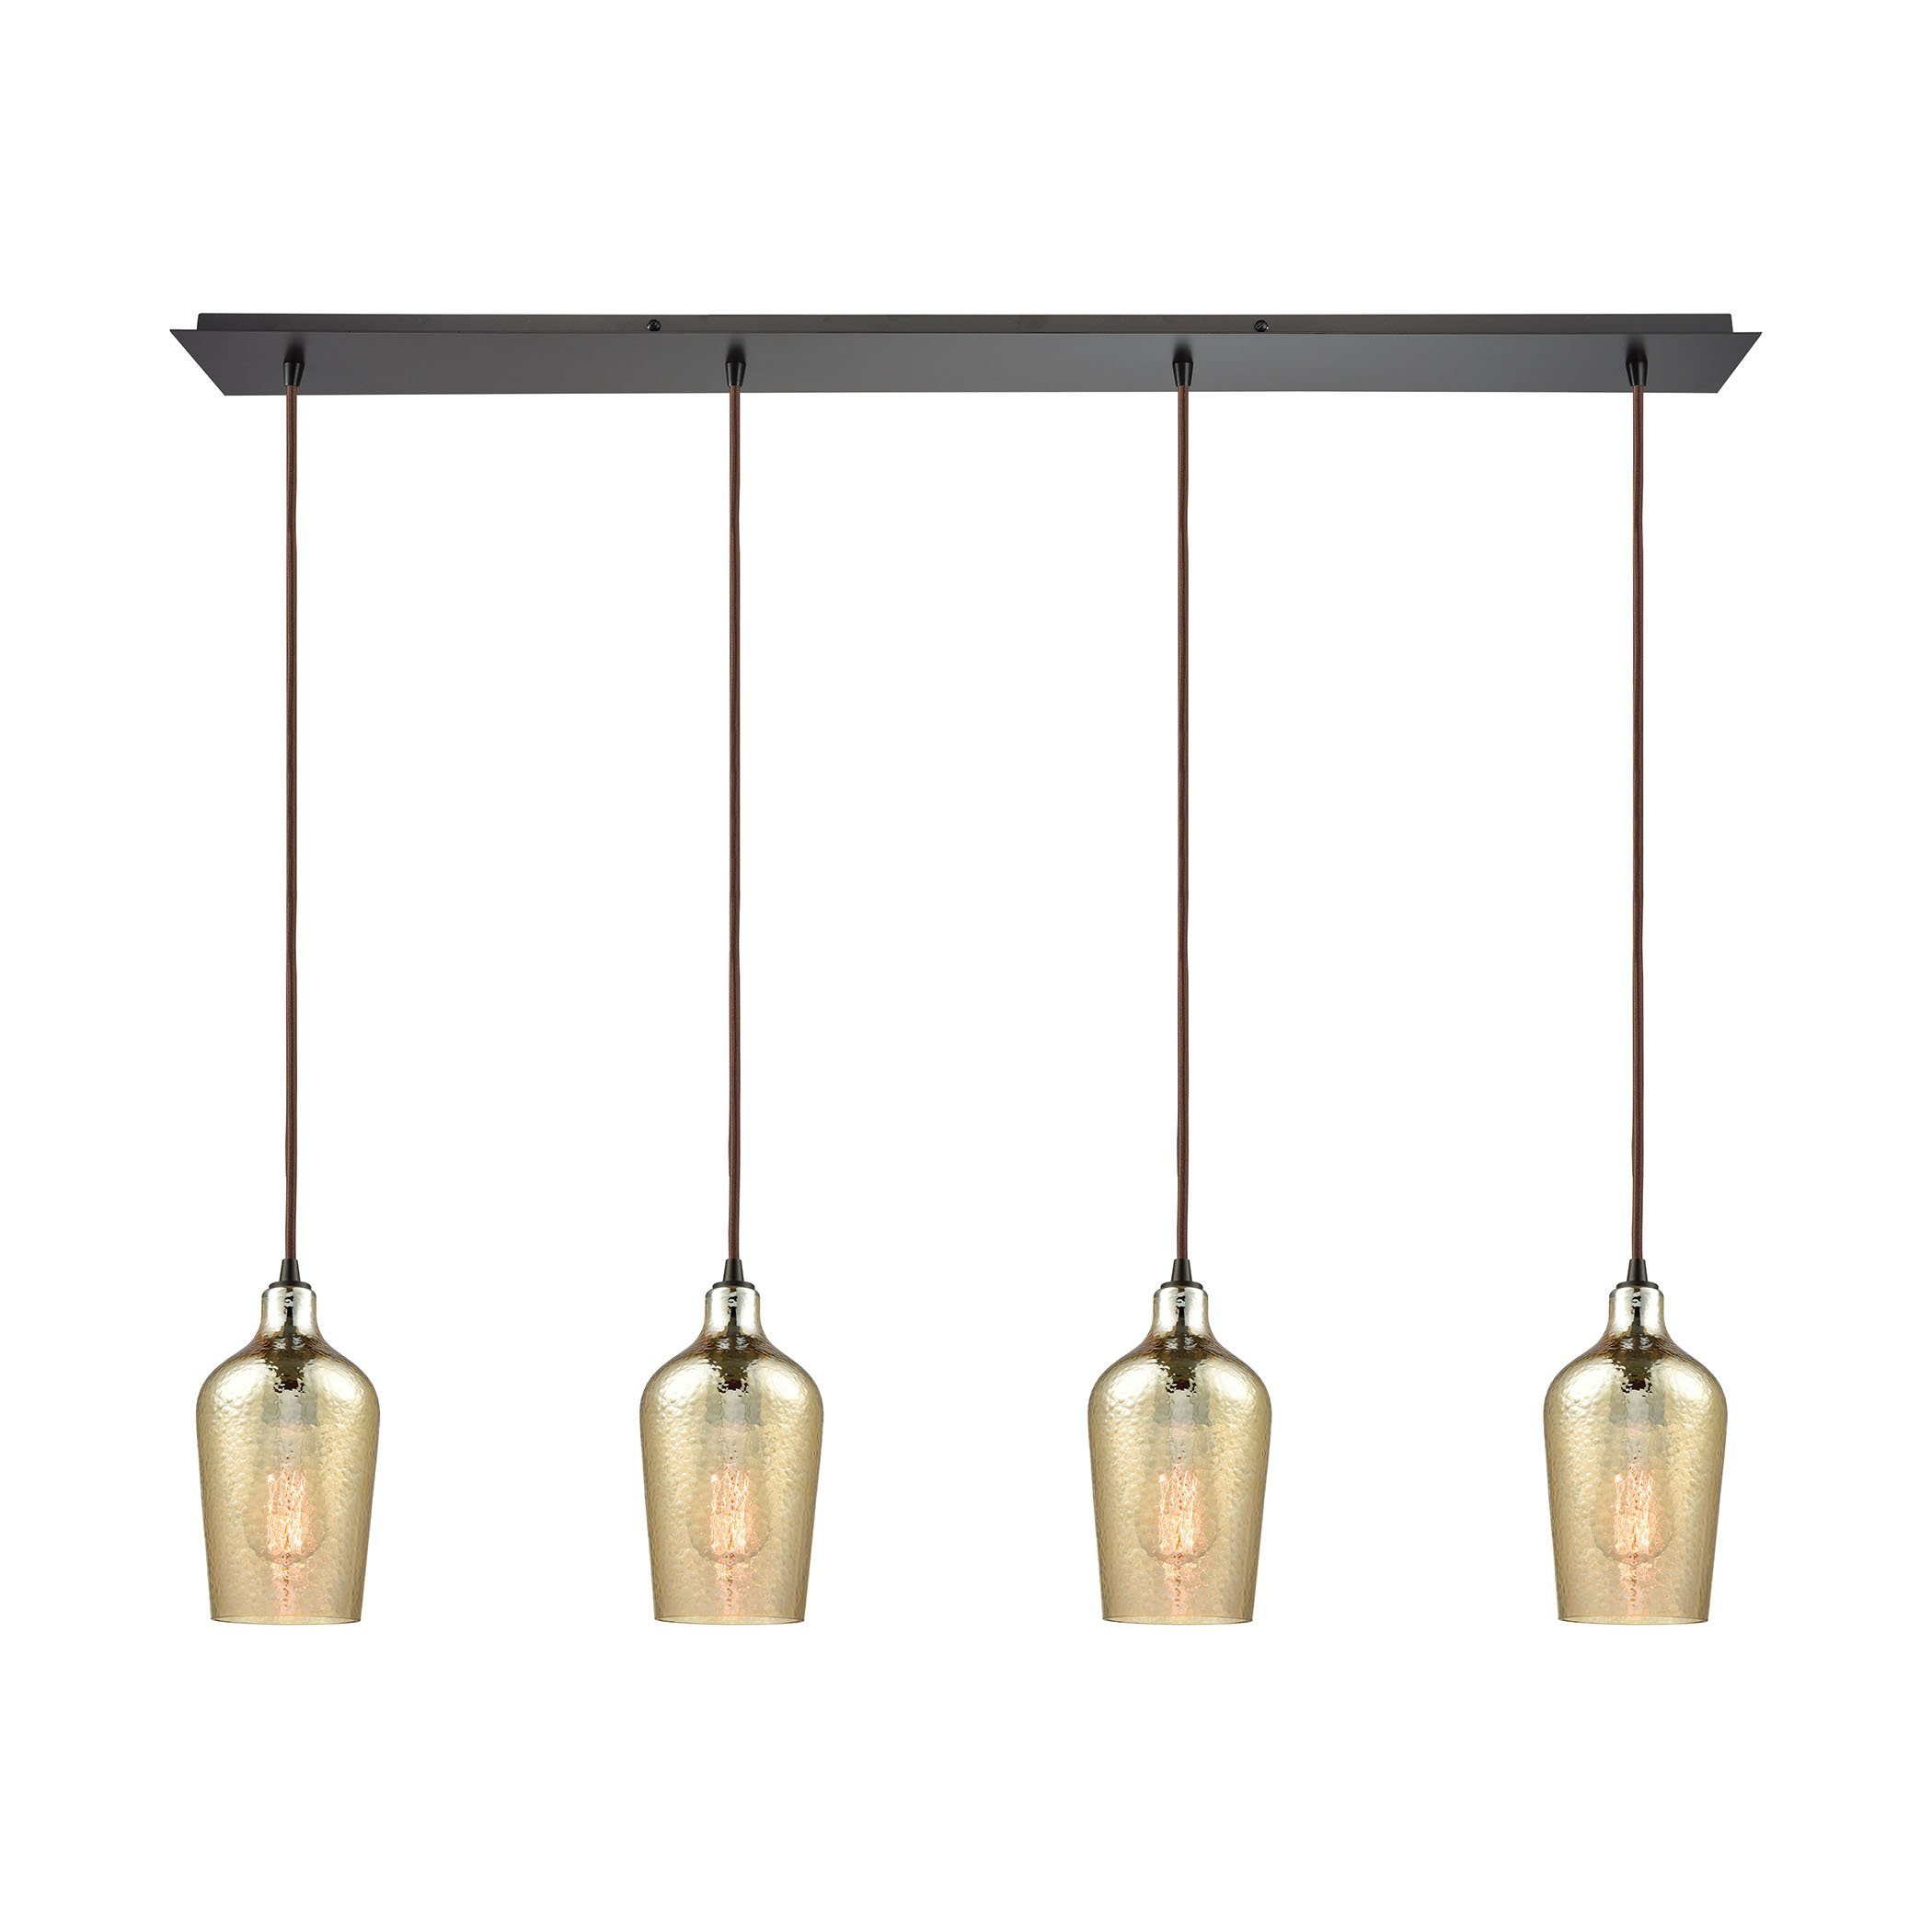 Hammered Glass 4 Light Linear Pan Fixture In Oil Rubbed Bronze With Hammered Amber Plated Glass Ceiling Elk Lighting 